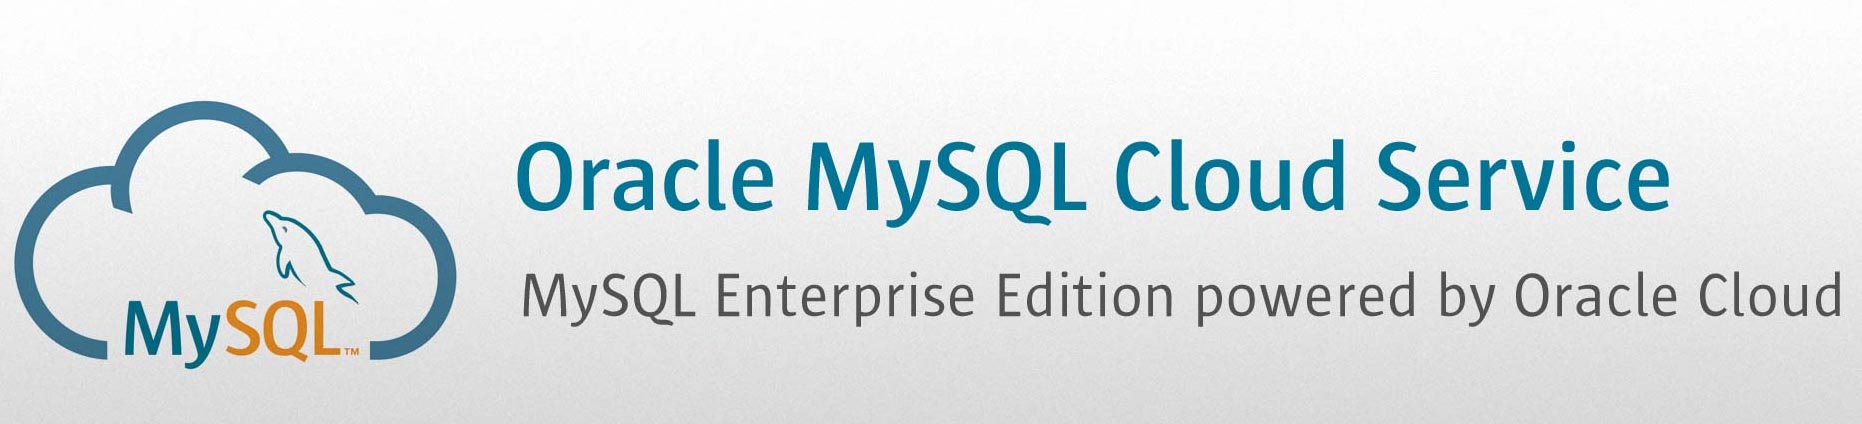 Oracle MySQL Cloud Service is best for both public and hybrid cloud database deployments.